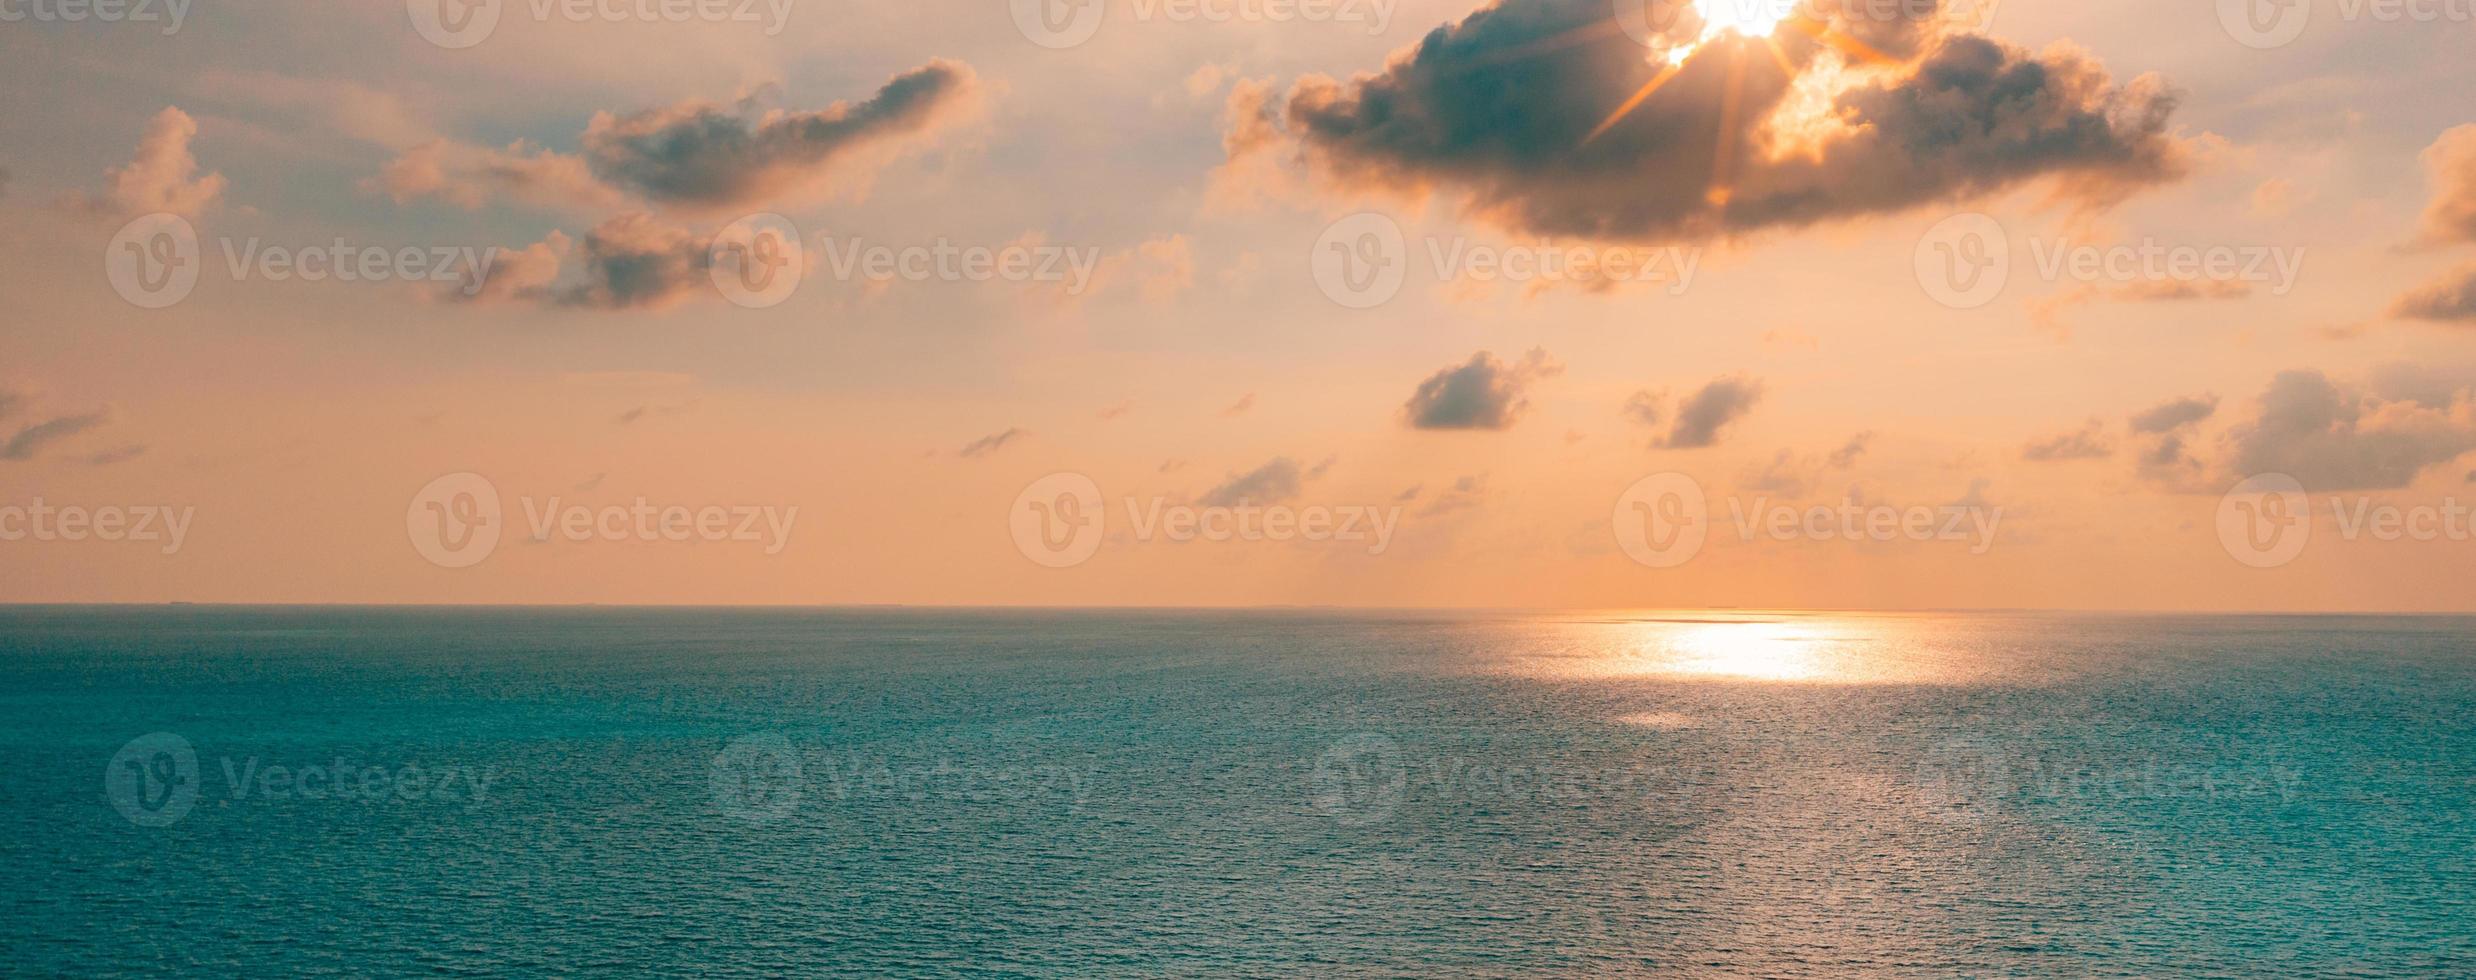 Aerial panoramic view of sunset over ocean. Colorful sky, clouds and water. Amazing serene scenic photo